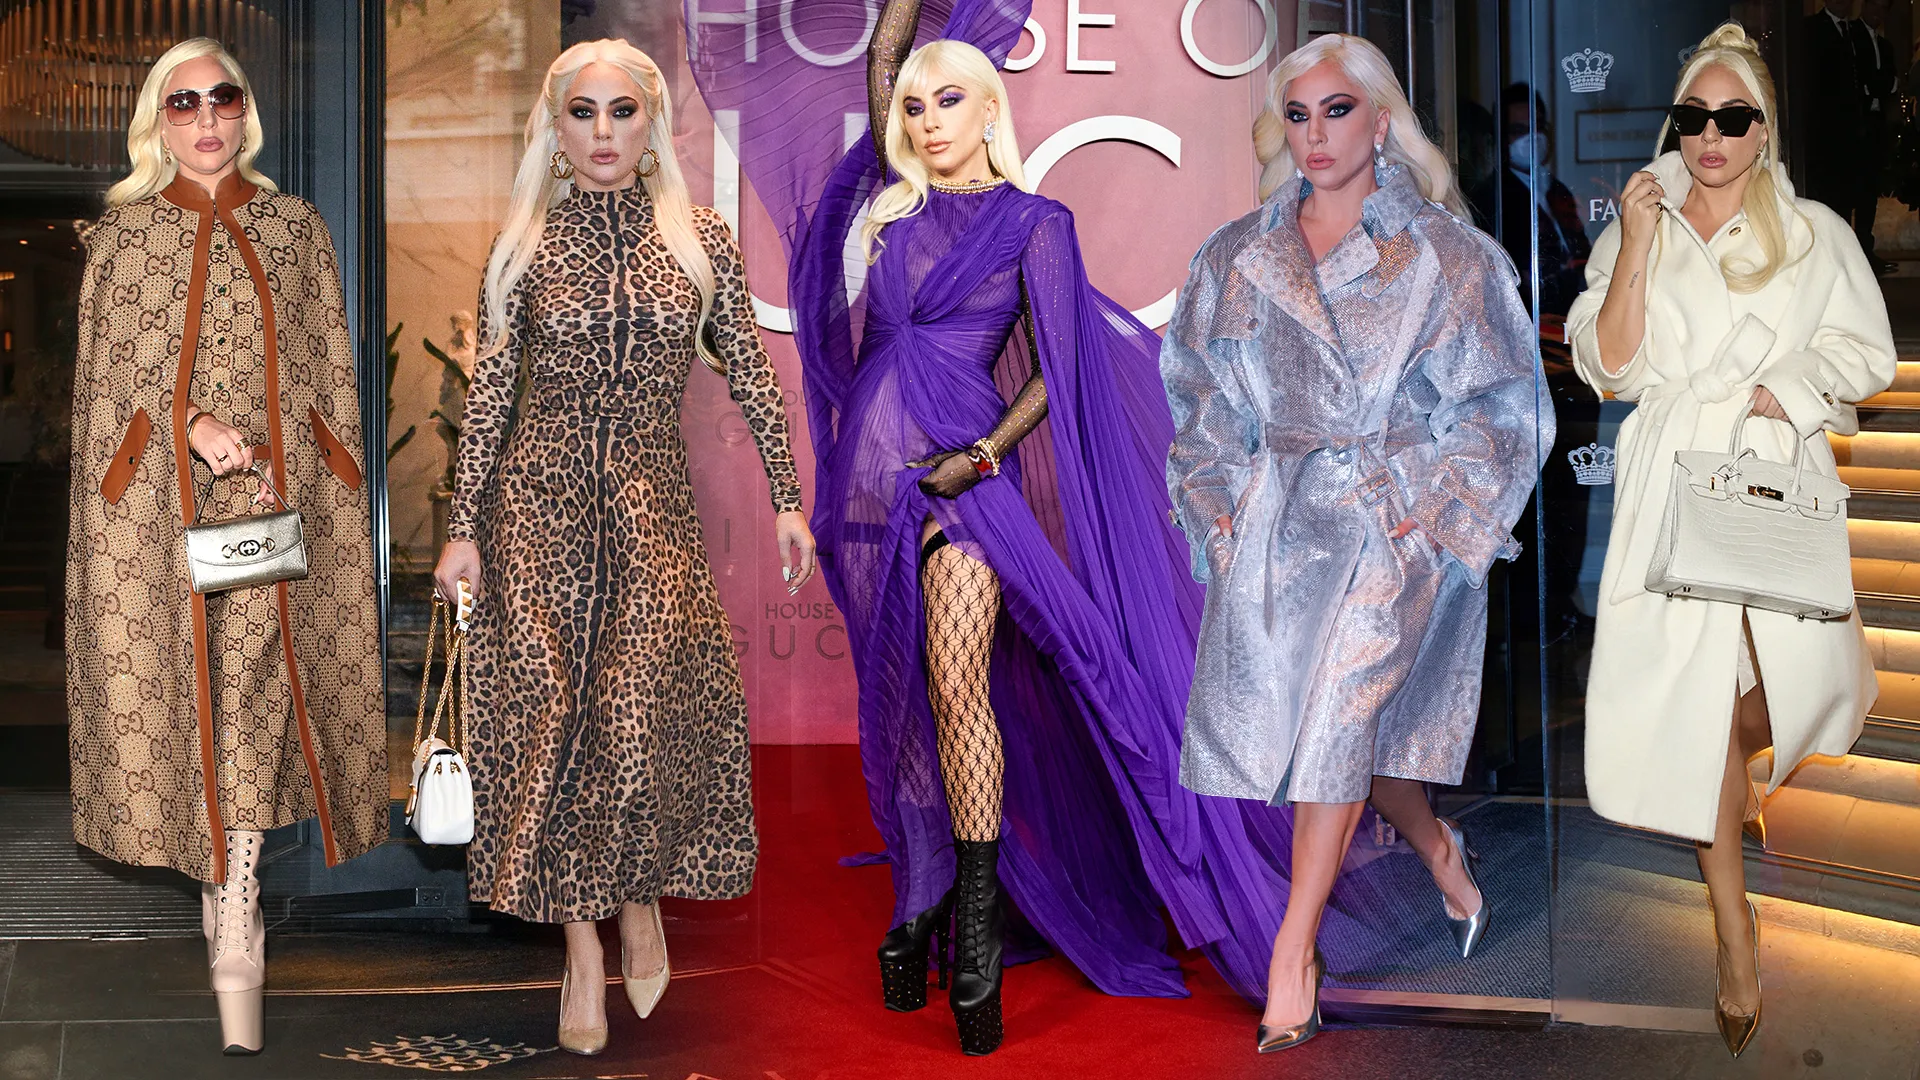 Lady Gaga's Music and Acting Career